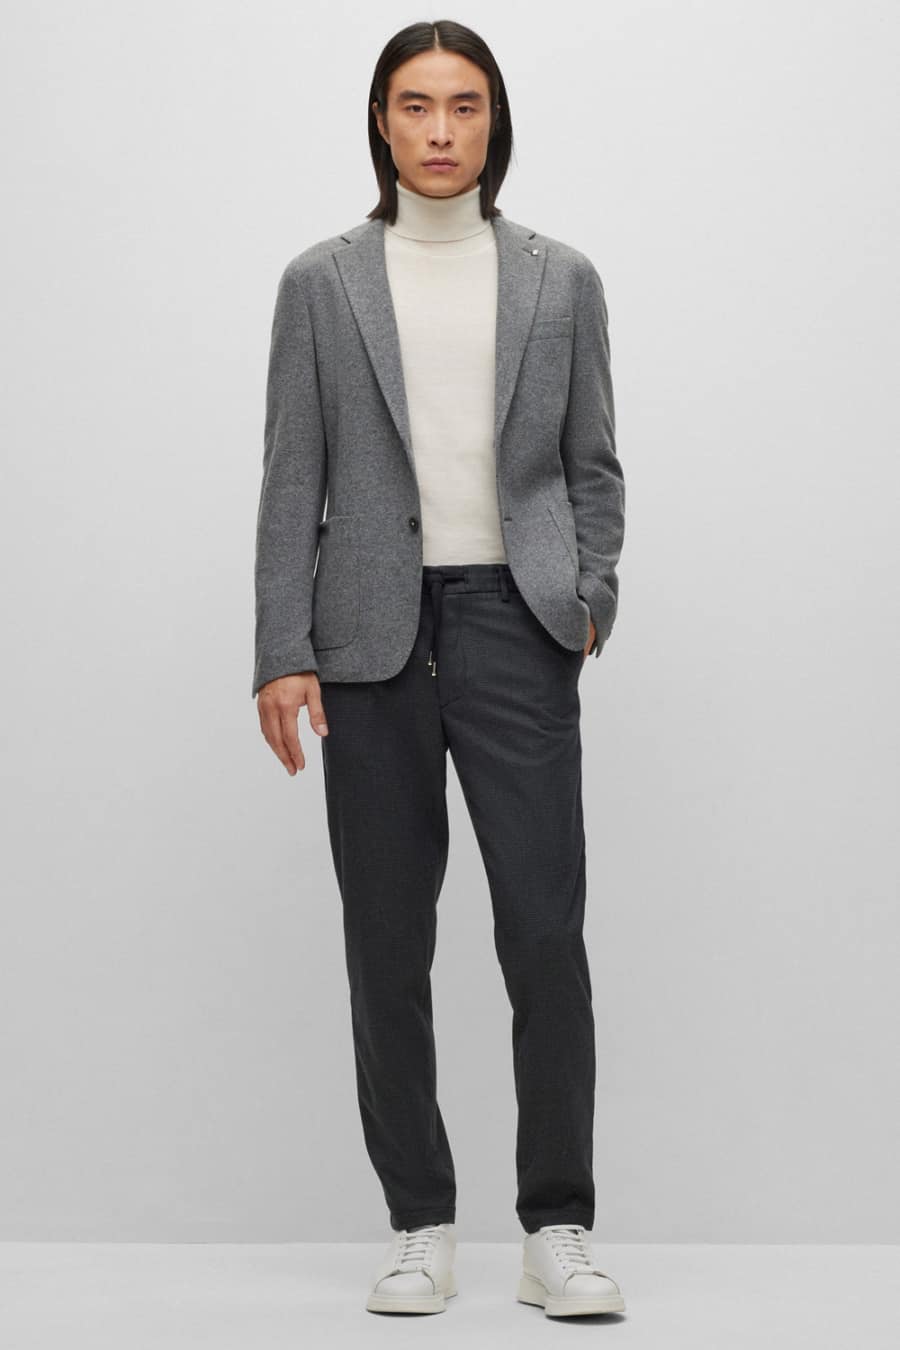 Men's charcoal trousers, white roll neck, light grey blazer and white sneakers outfit